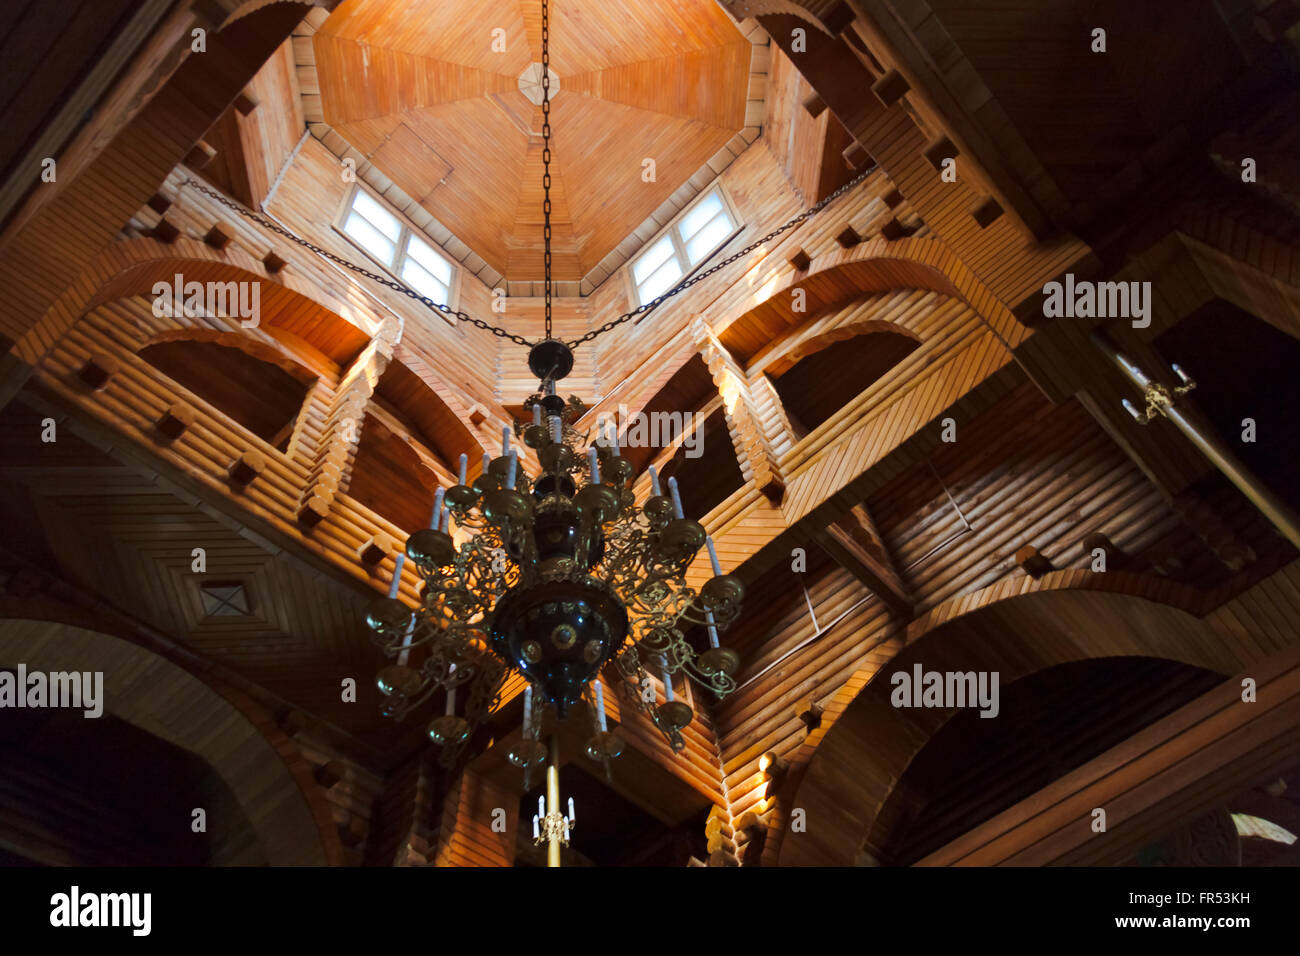 Inside The Orthodox Church The Largest Wood Structure In